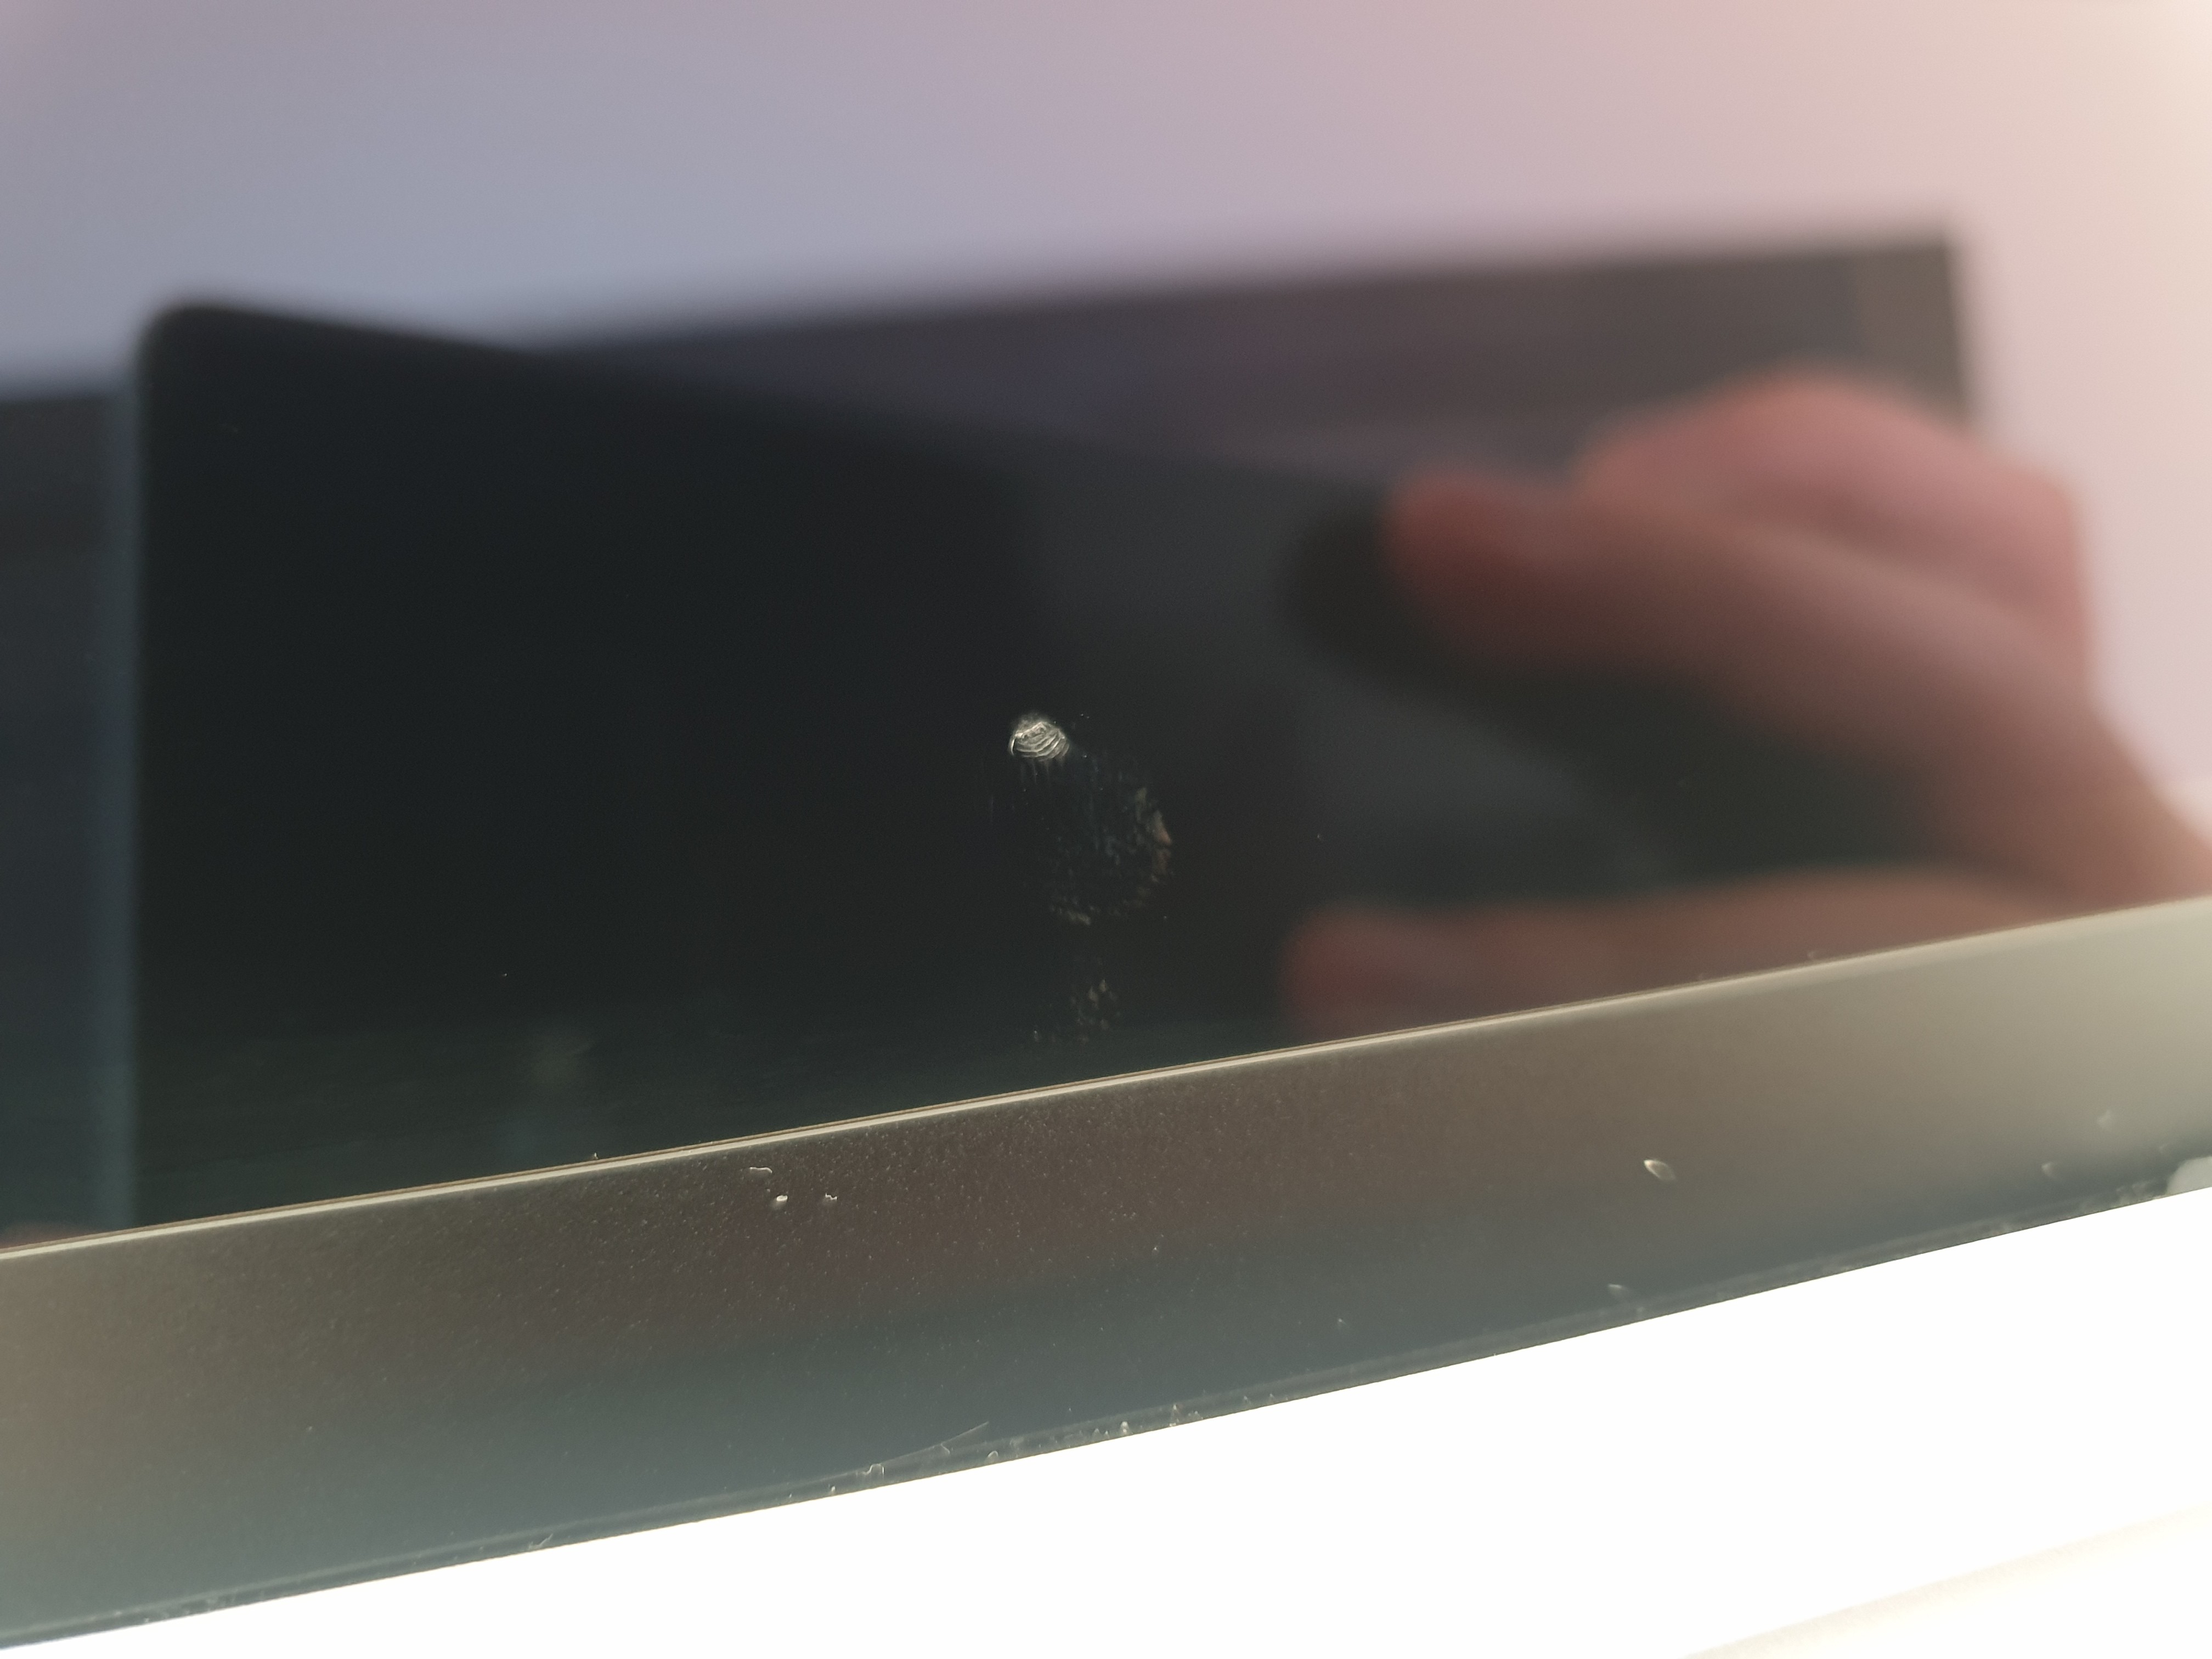 I found this kind of micro-scratches on the screen of my MacBook Pro 14